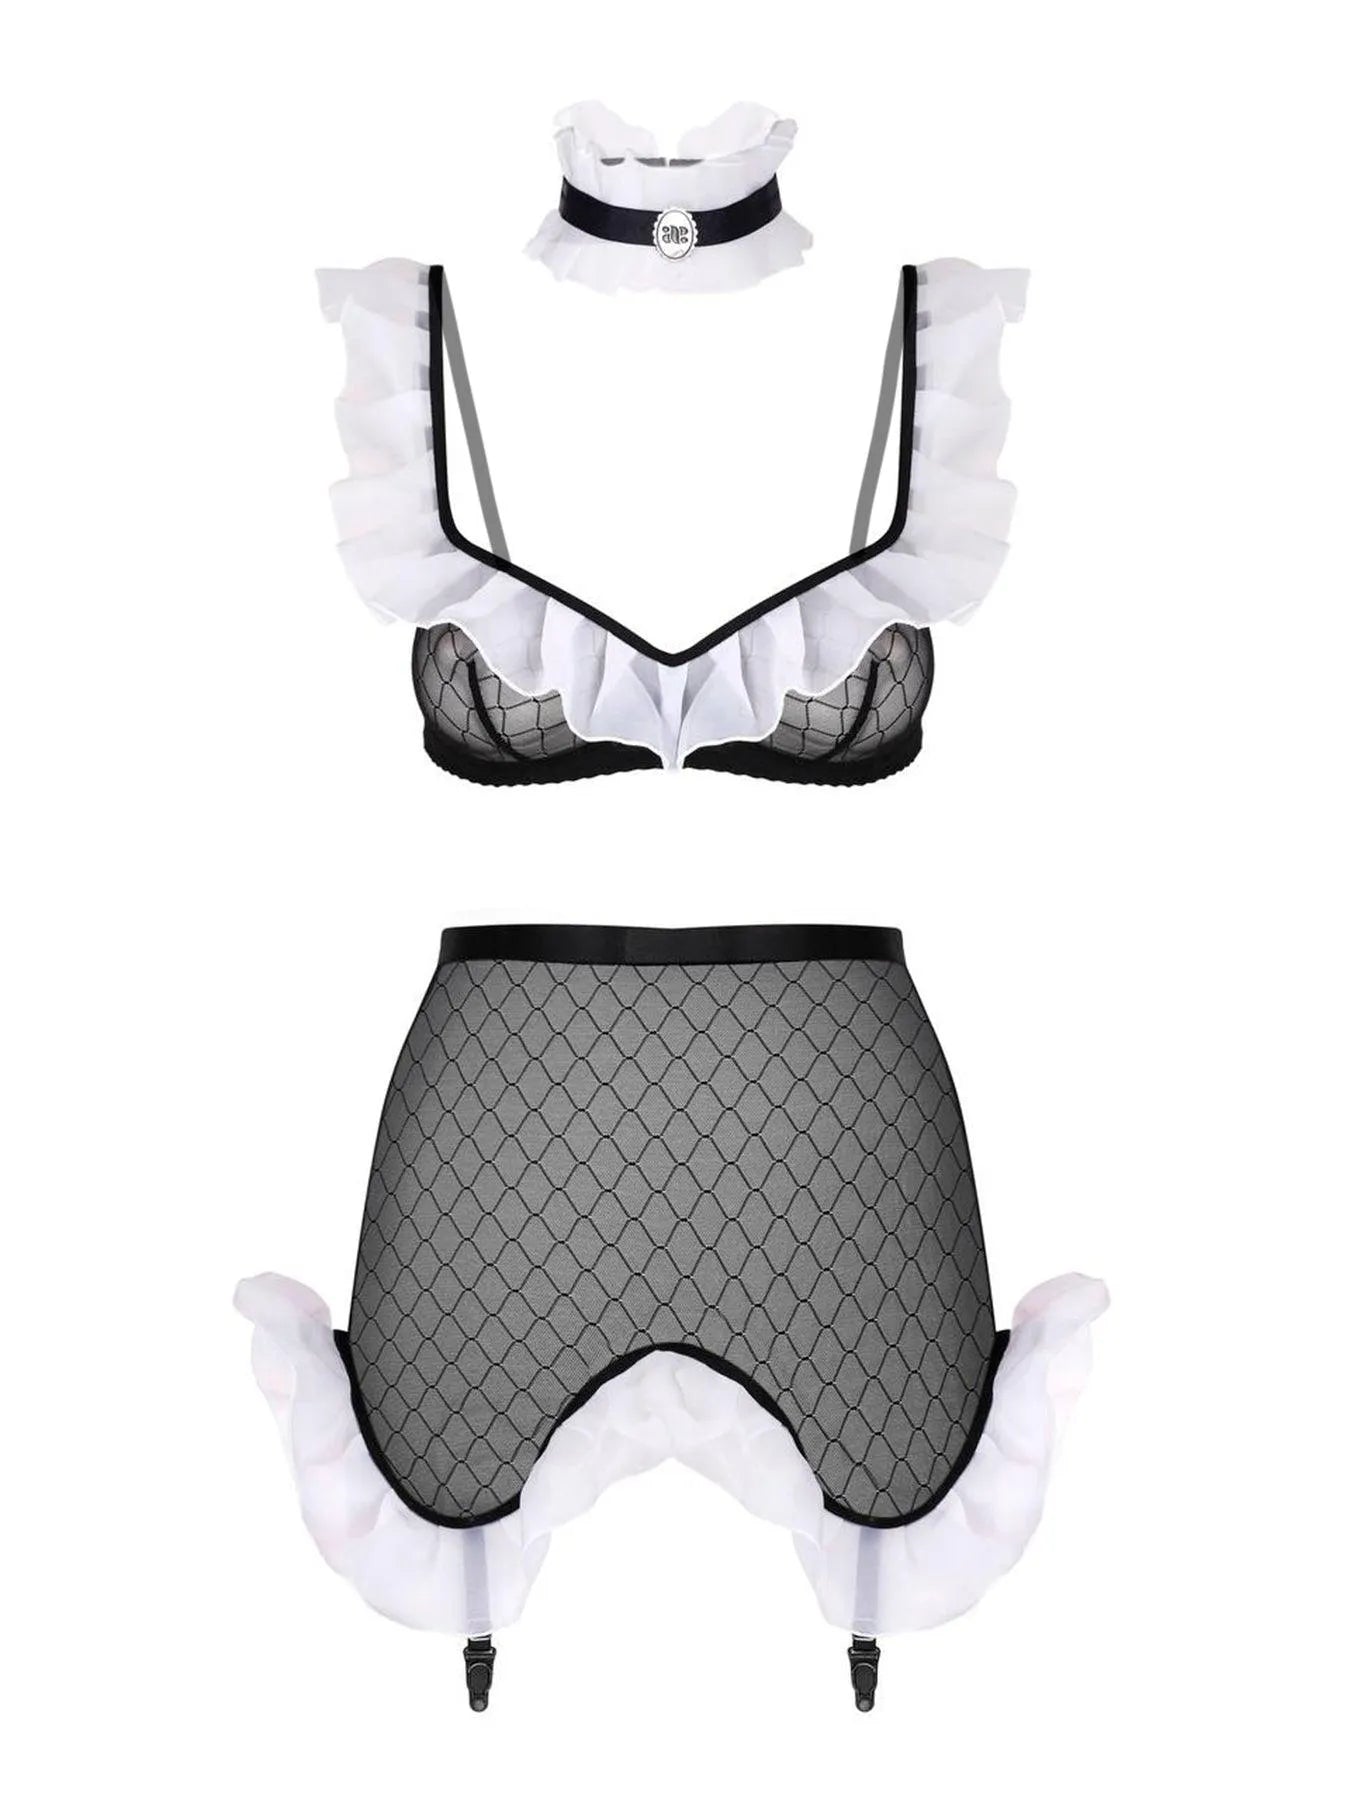 ROLE-PLAYING LINGERIE SET &quot;FRENCH MAID&quot;